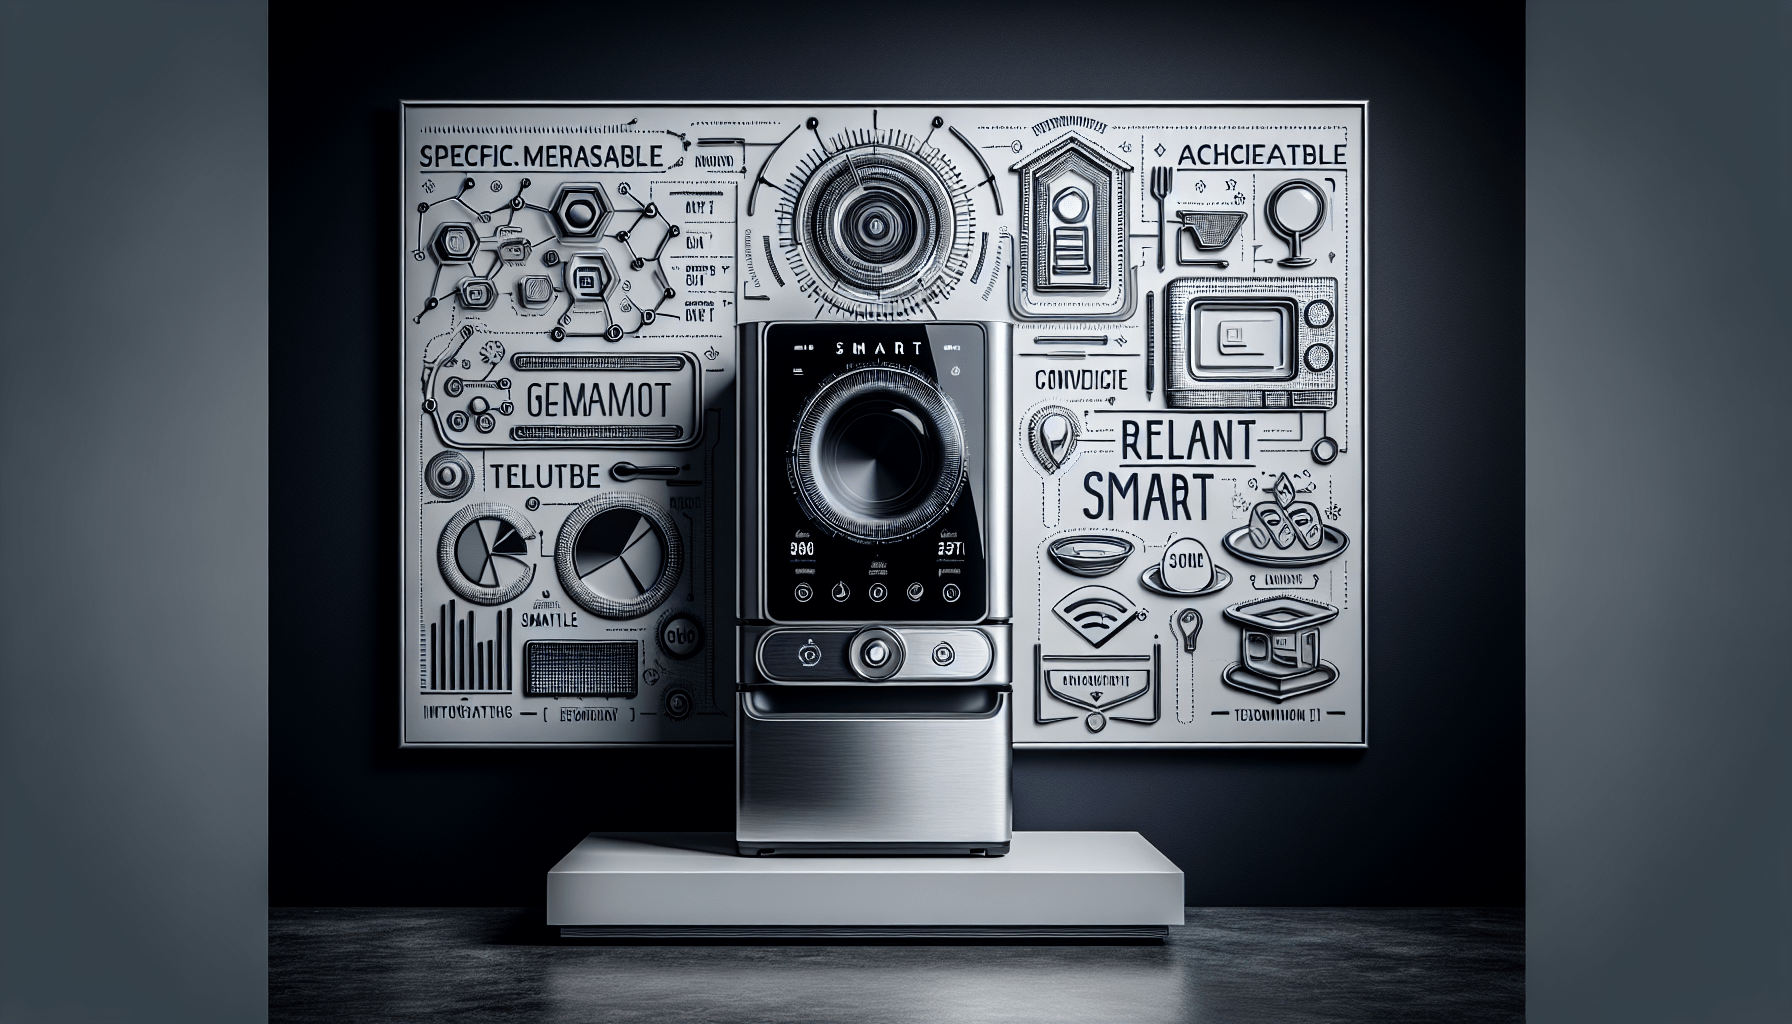 What Does Smart Stand For In Appliances?